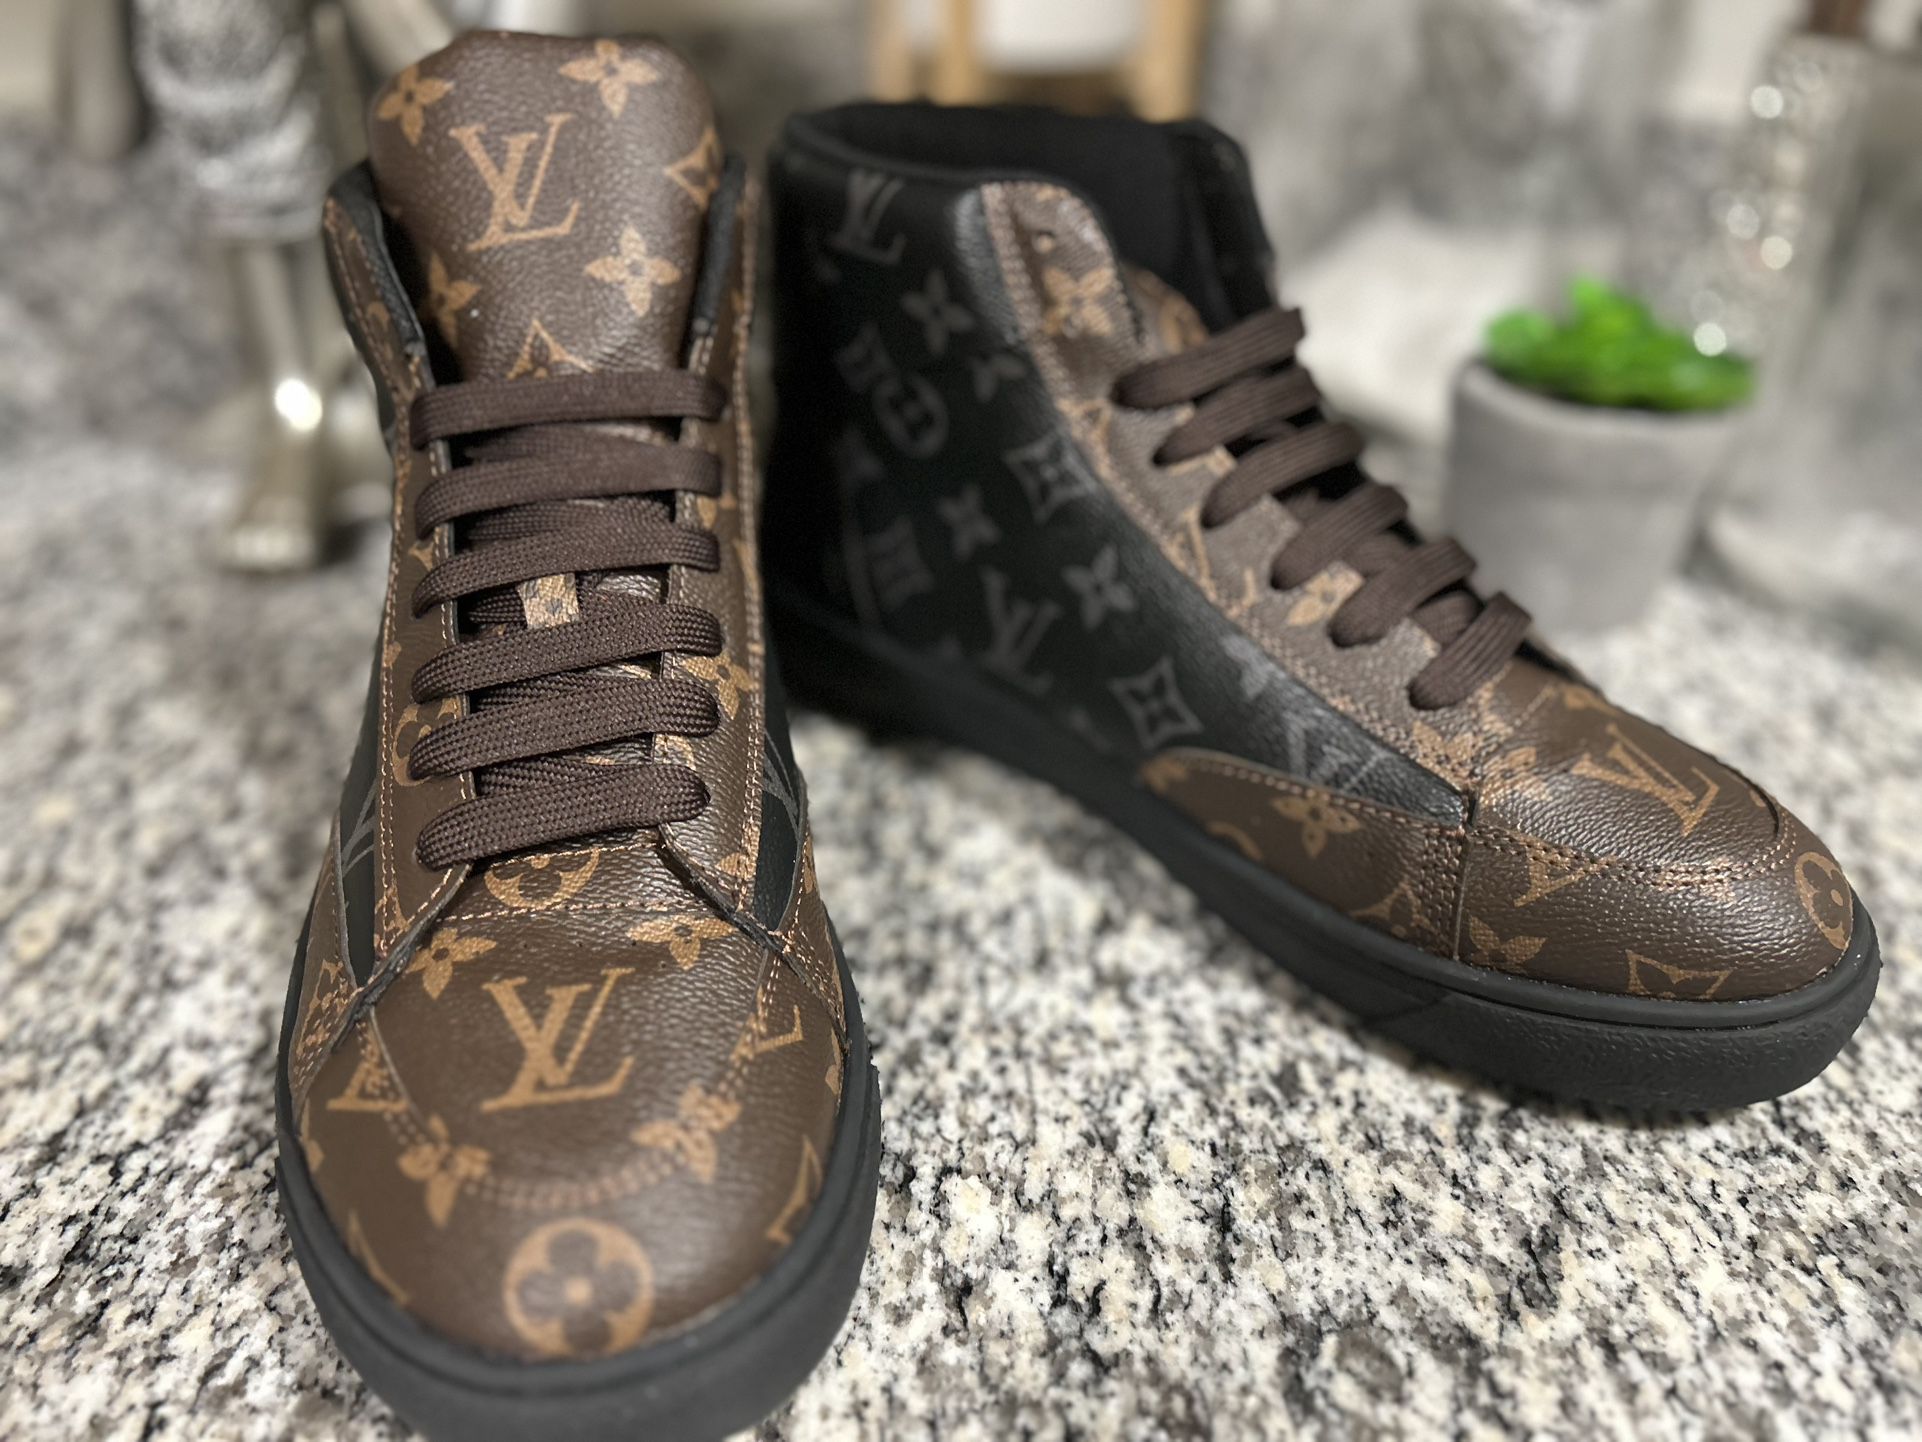 10 Men LV Shoes for Sale in Indianapolis, IN - OfferUp